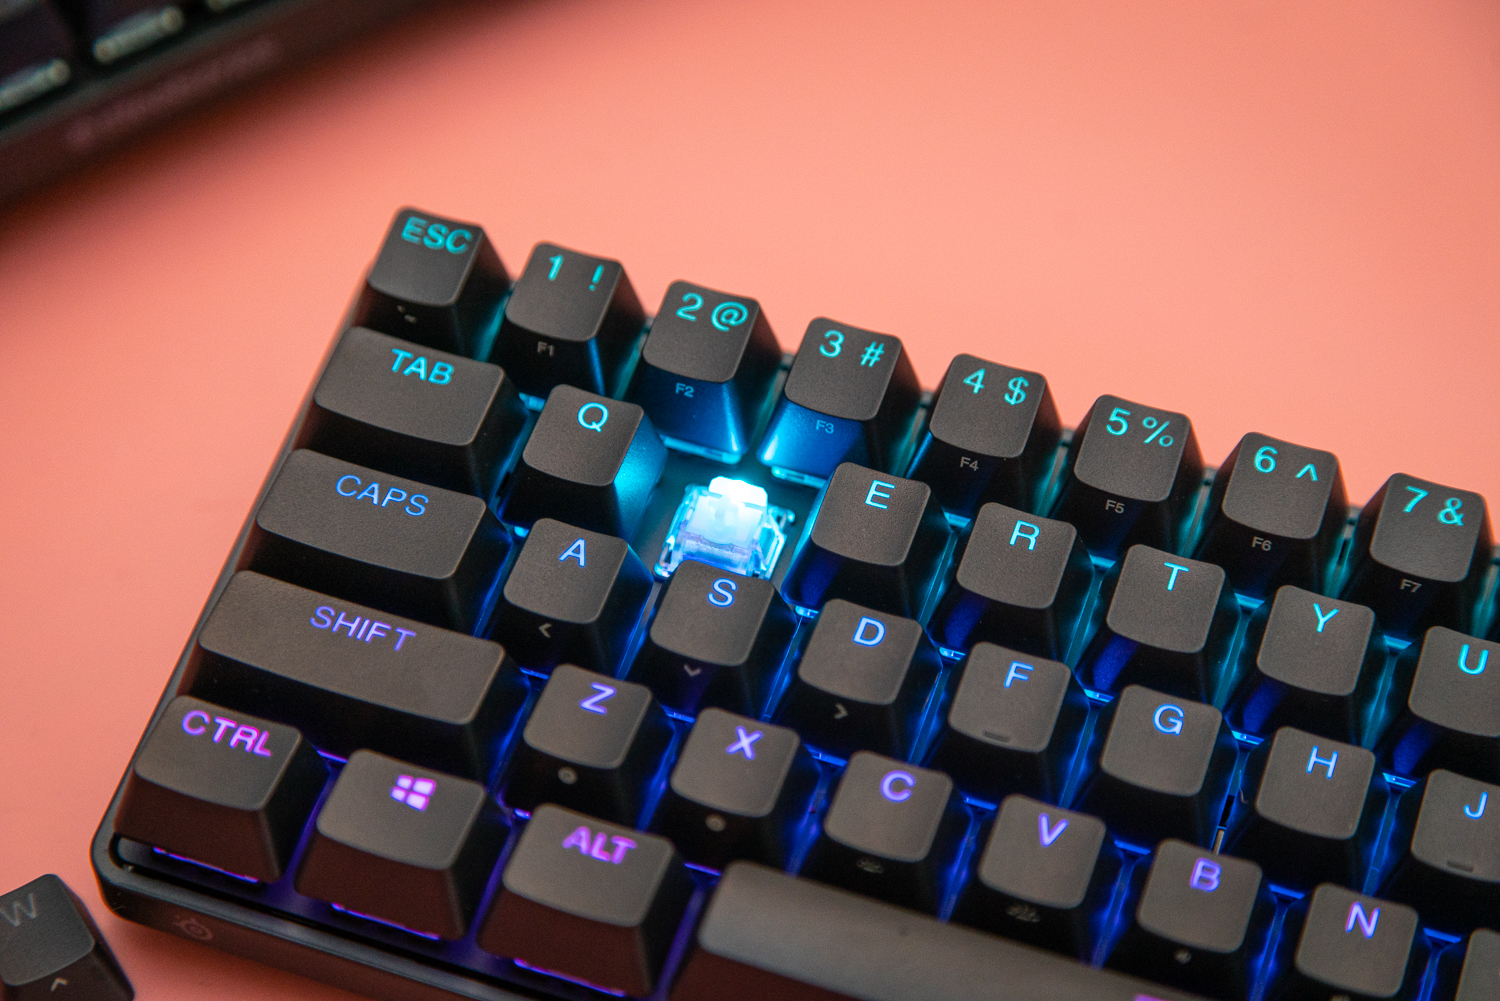 SteelSeries Apex Pro Mini keyboard review: A small but mighty gaming tool